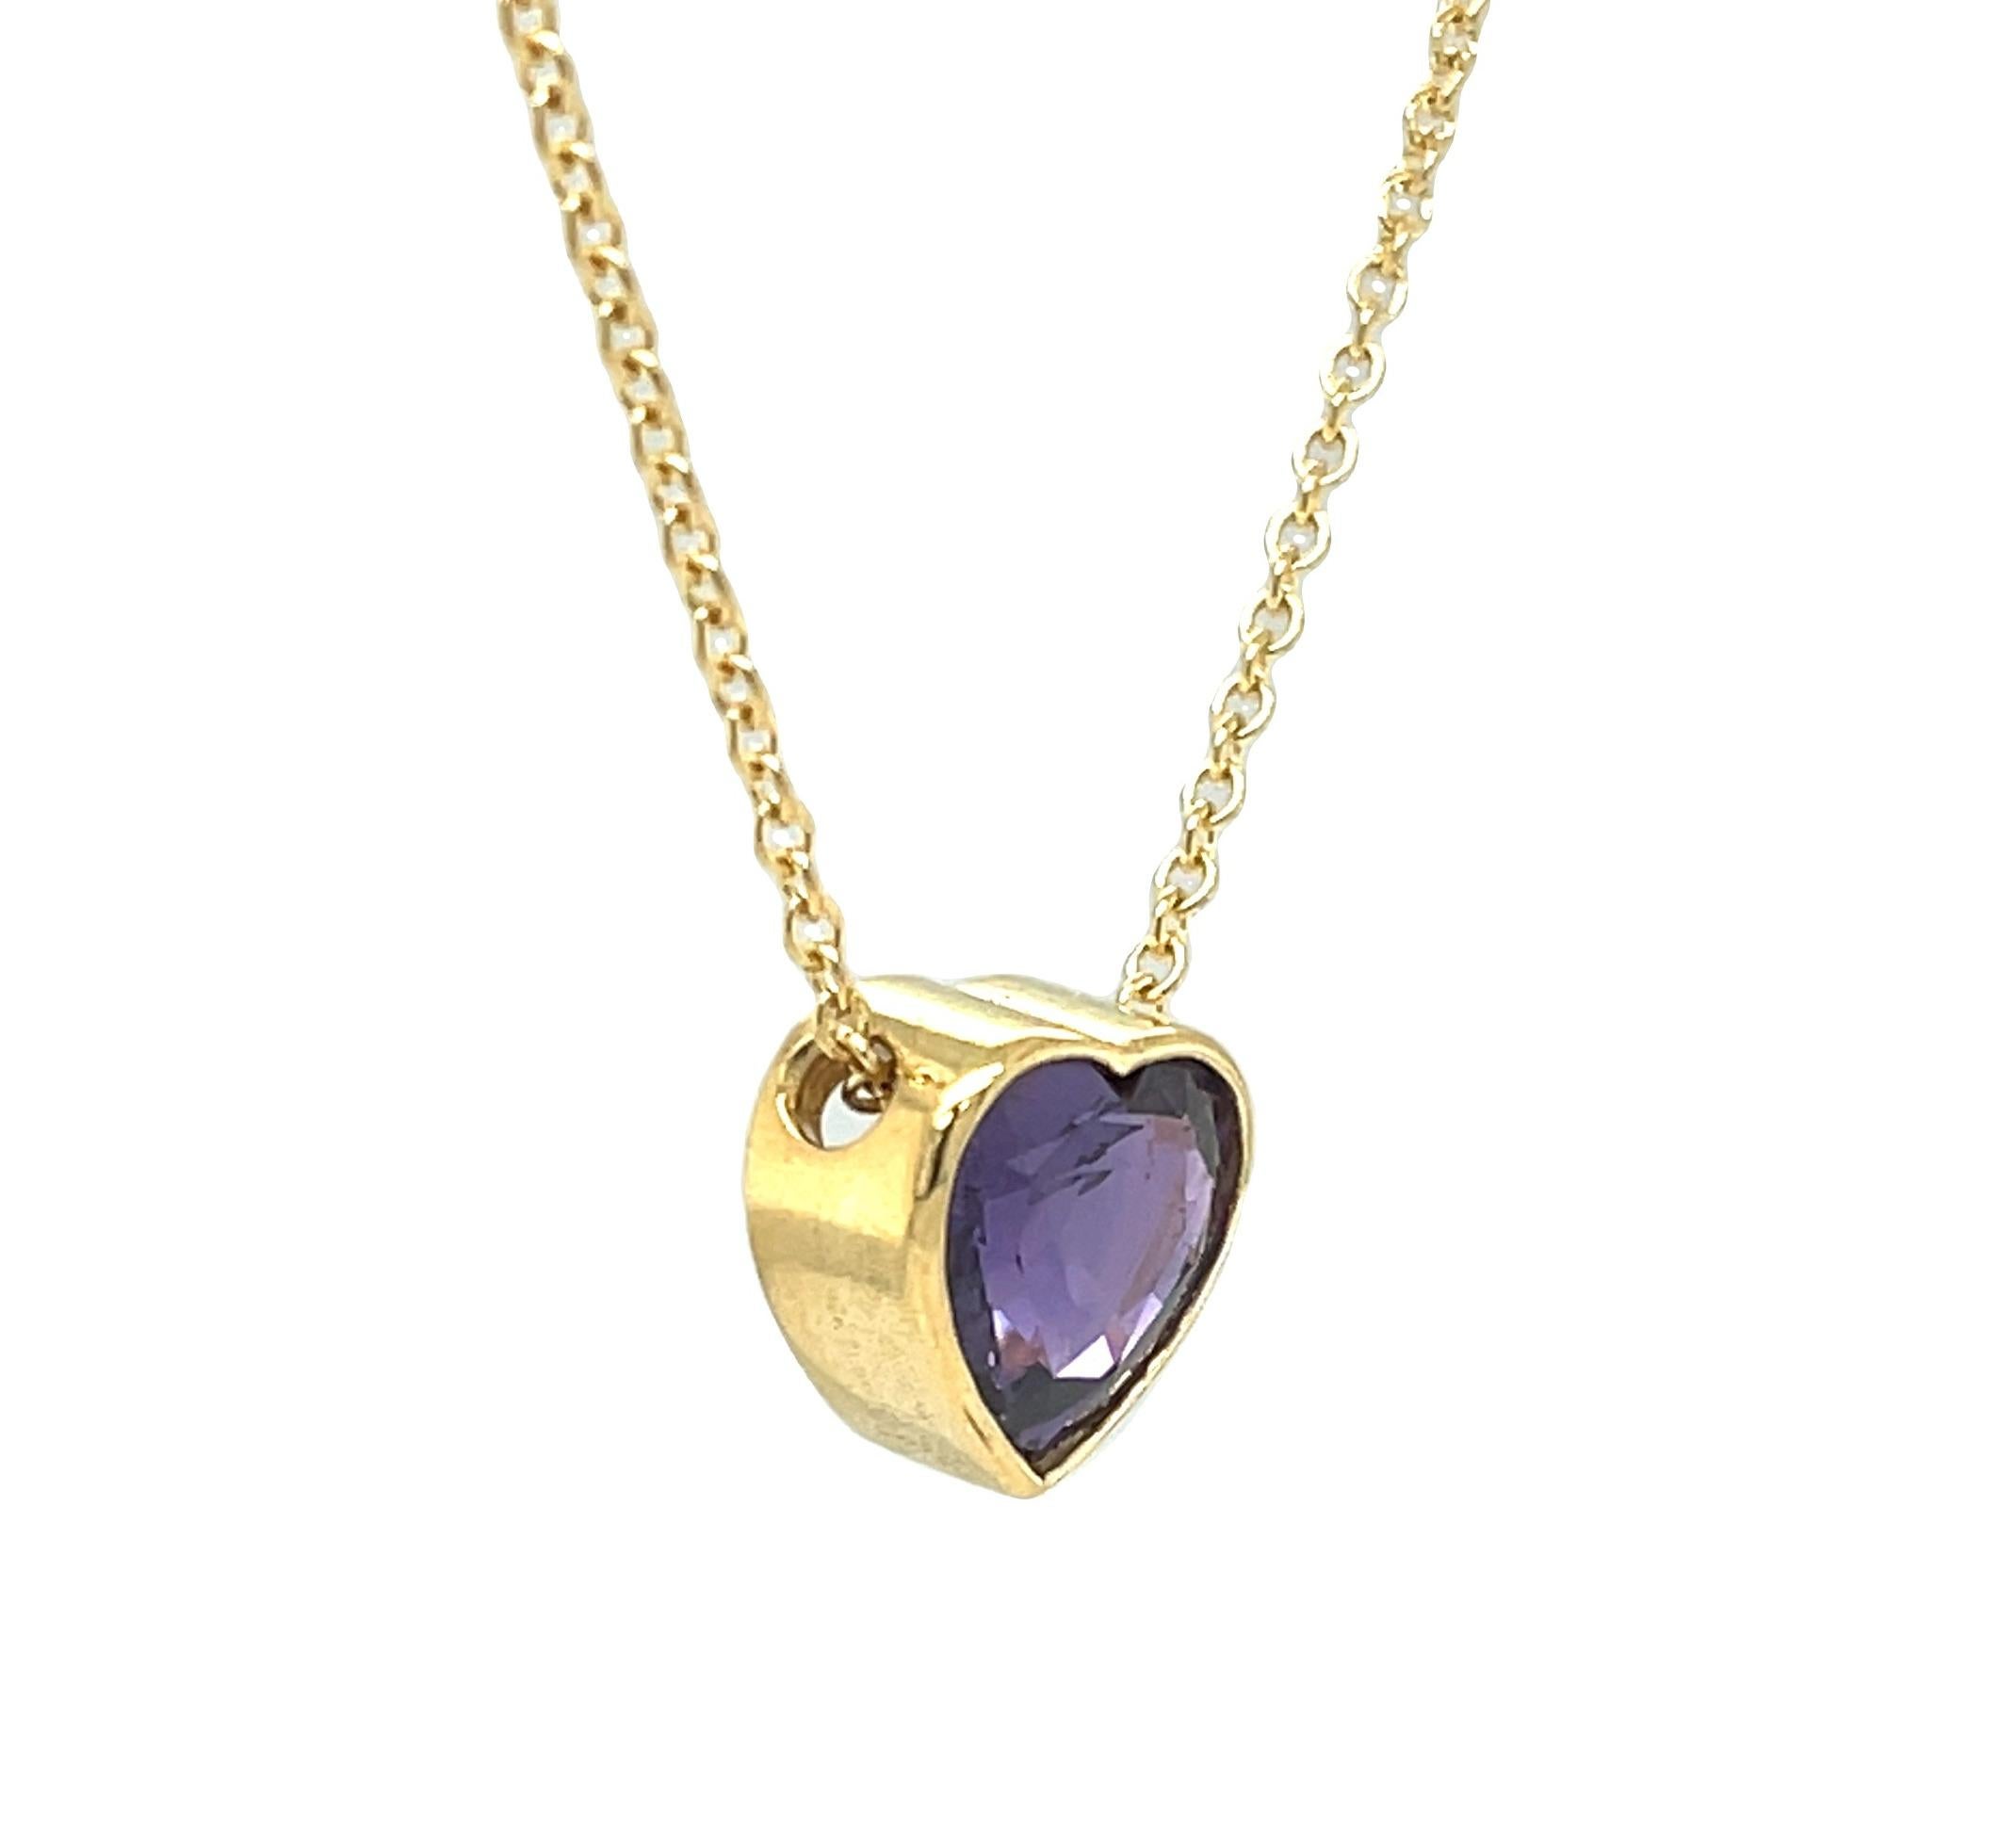 GIA Certified Unheated 3.56 Carat Purple Sapphire Heart Necklace in 18k Gold For Sale 1